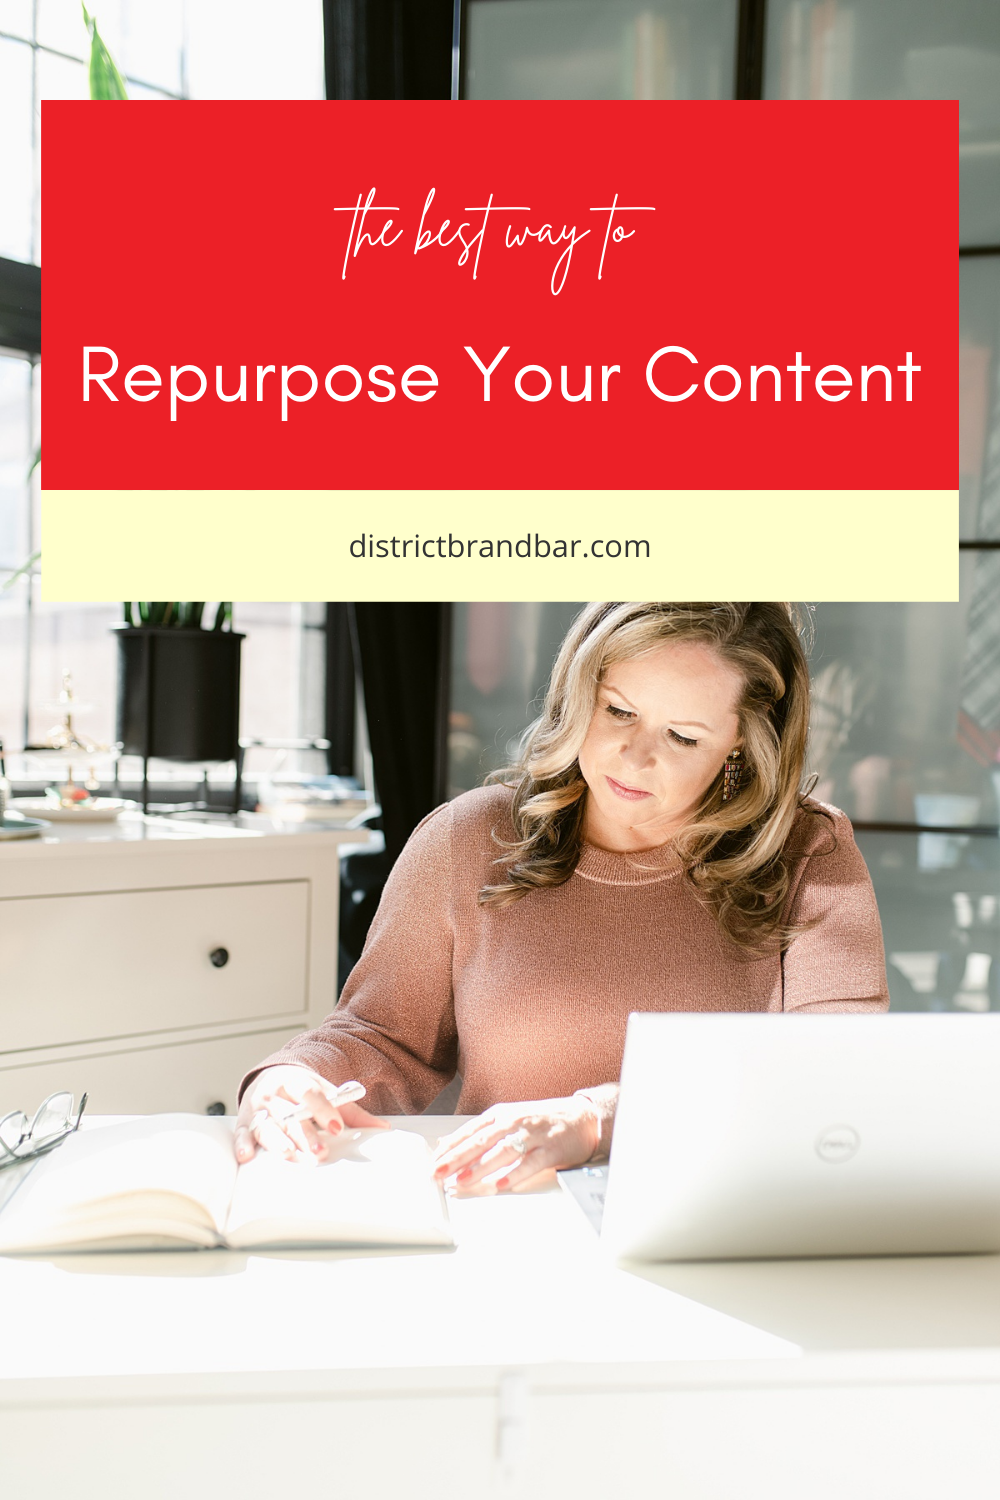 How to Repurpose Your Marketing Content